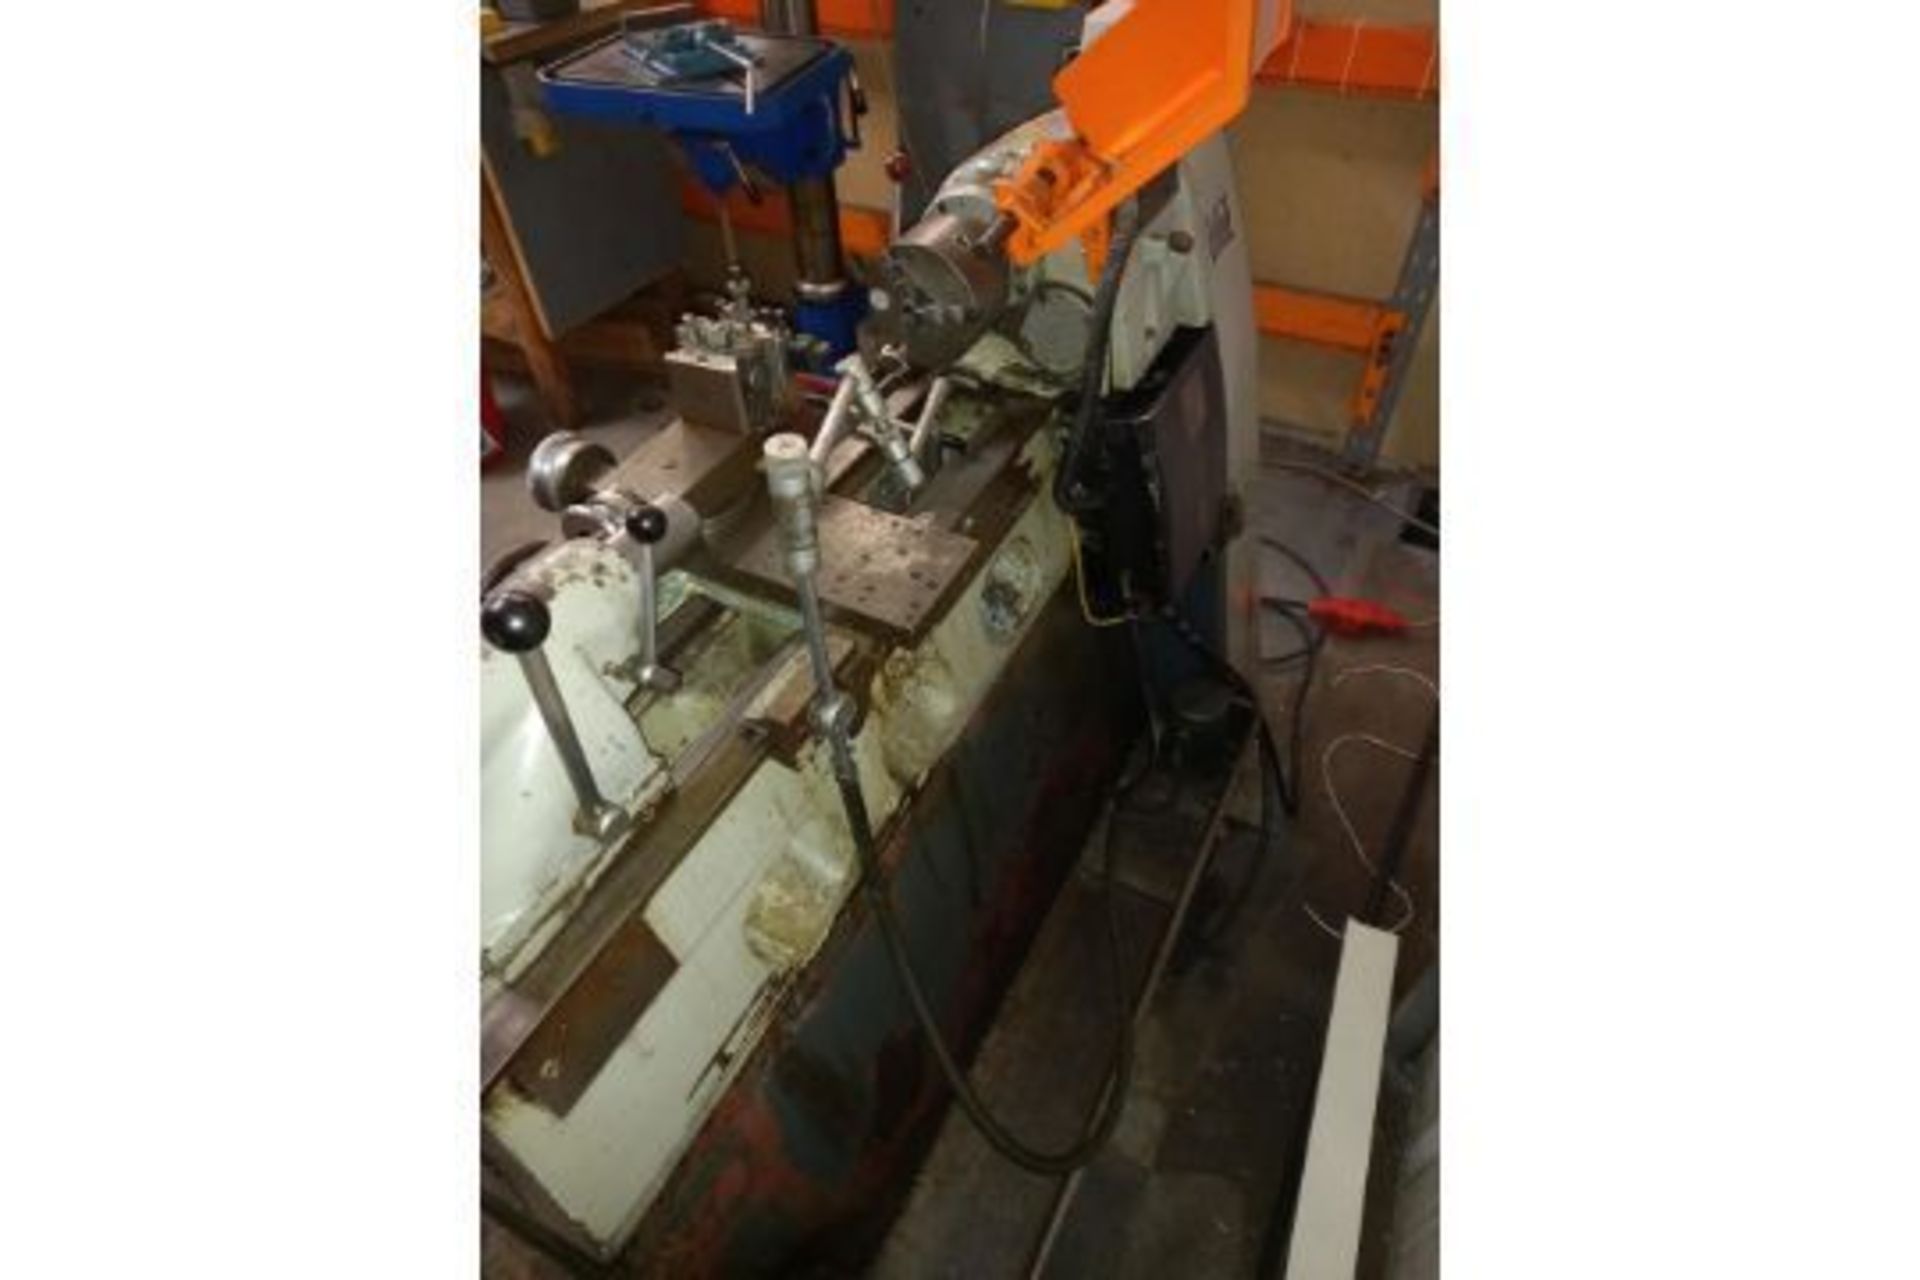 Colchester 5x20 Chipmaster Lathe - Image 9 of 11